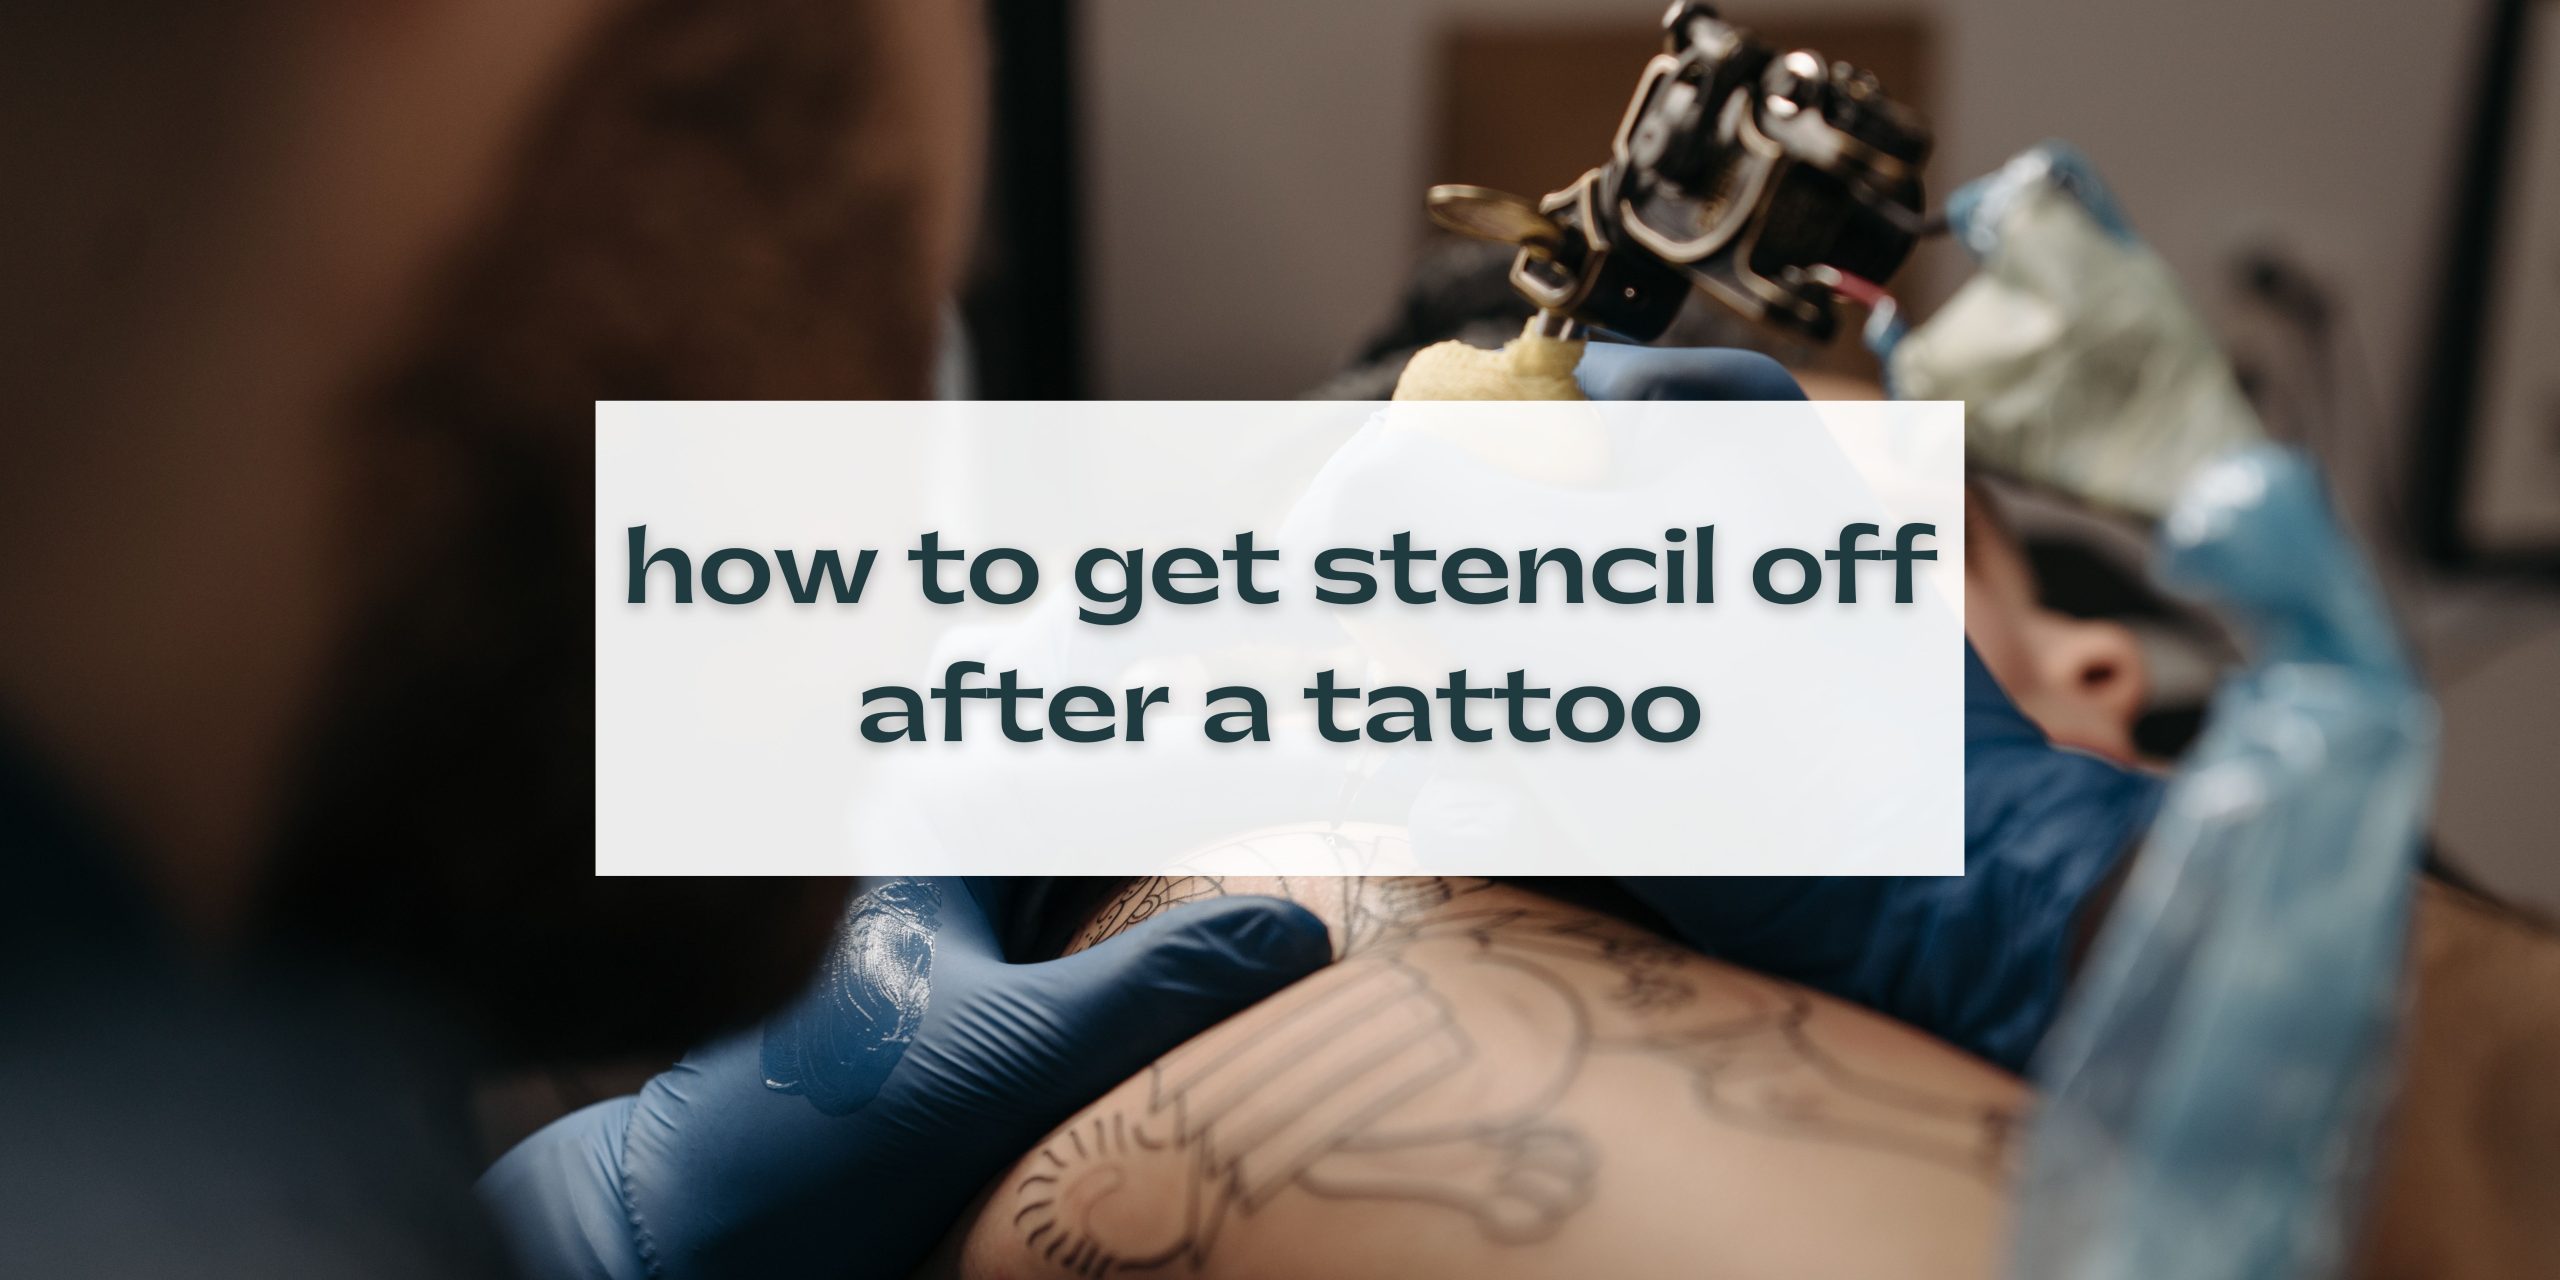 how to get stencil off after a tattoo